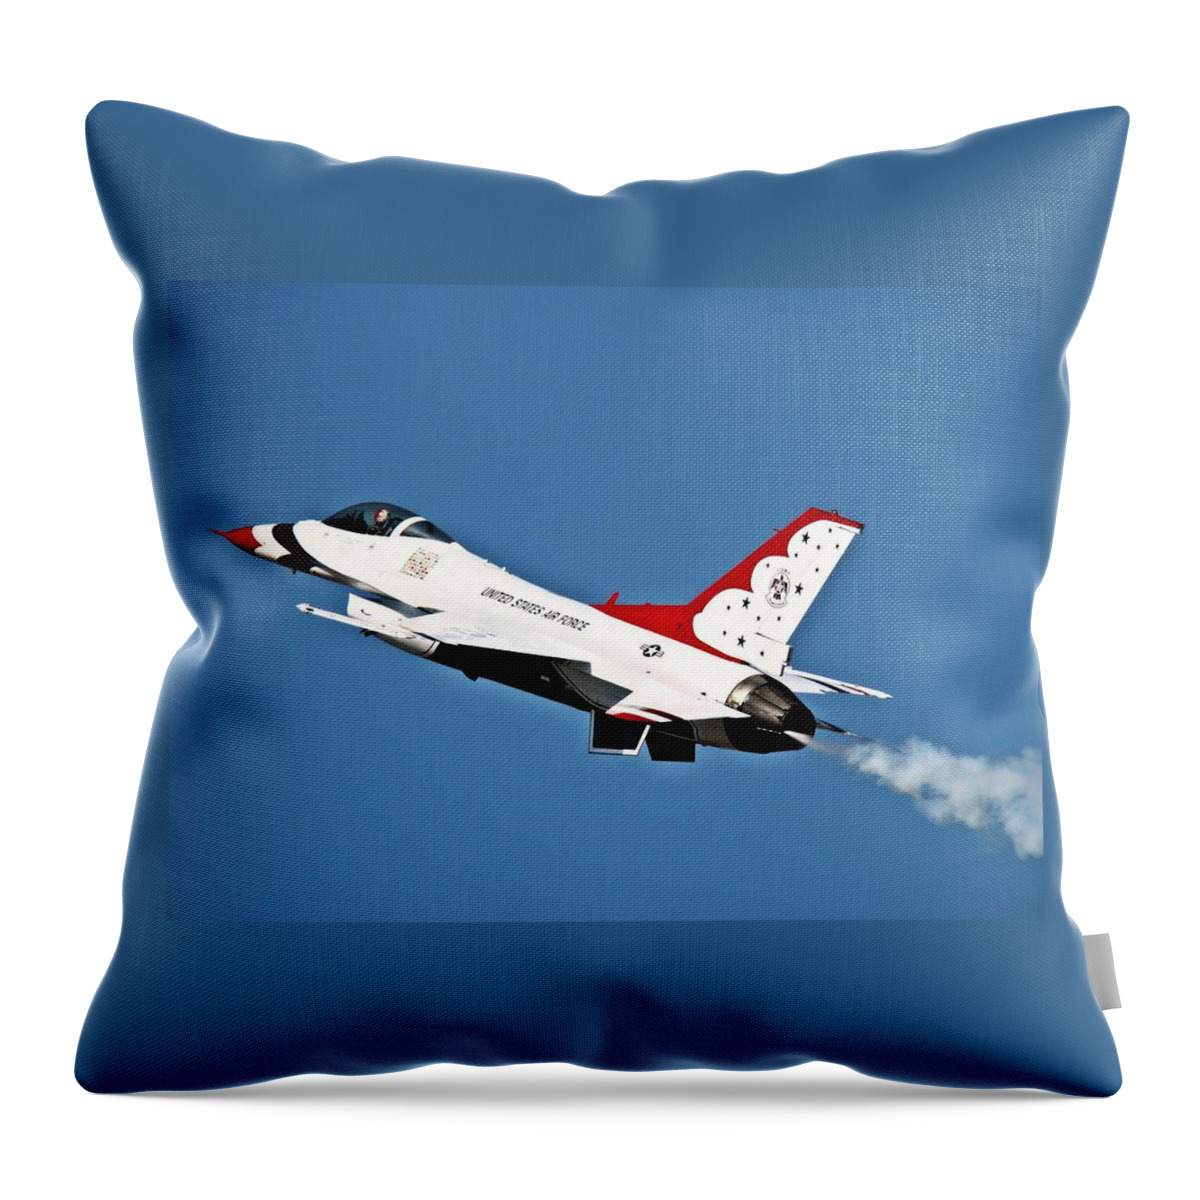 Usaf Throw Pillow featuring the photograph USAF Thunderbird F-16 by Nick Kloepping